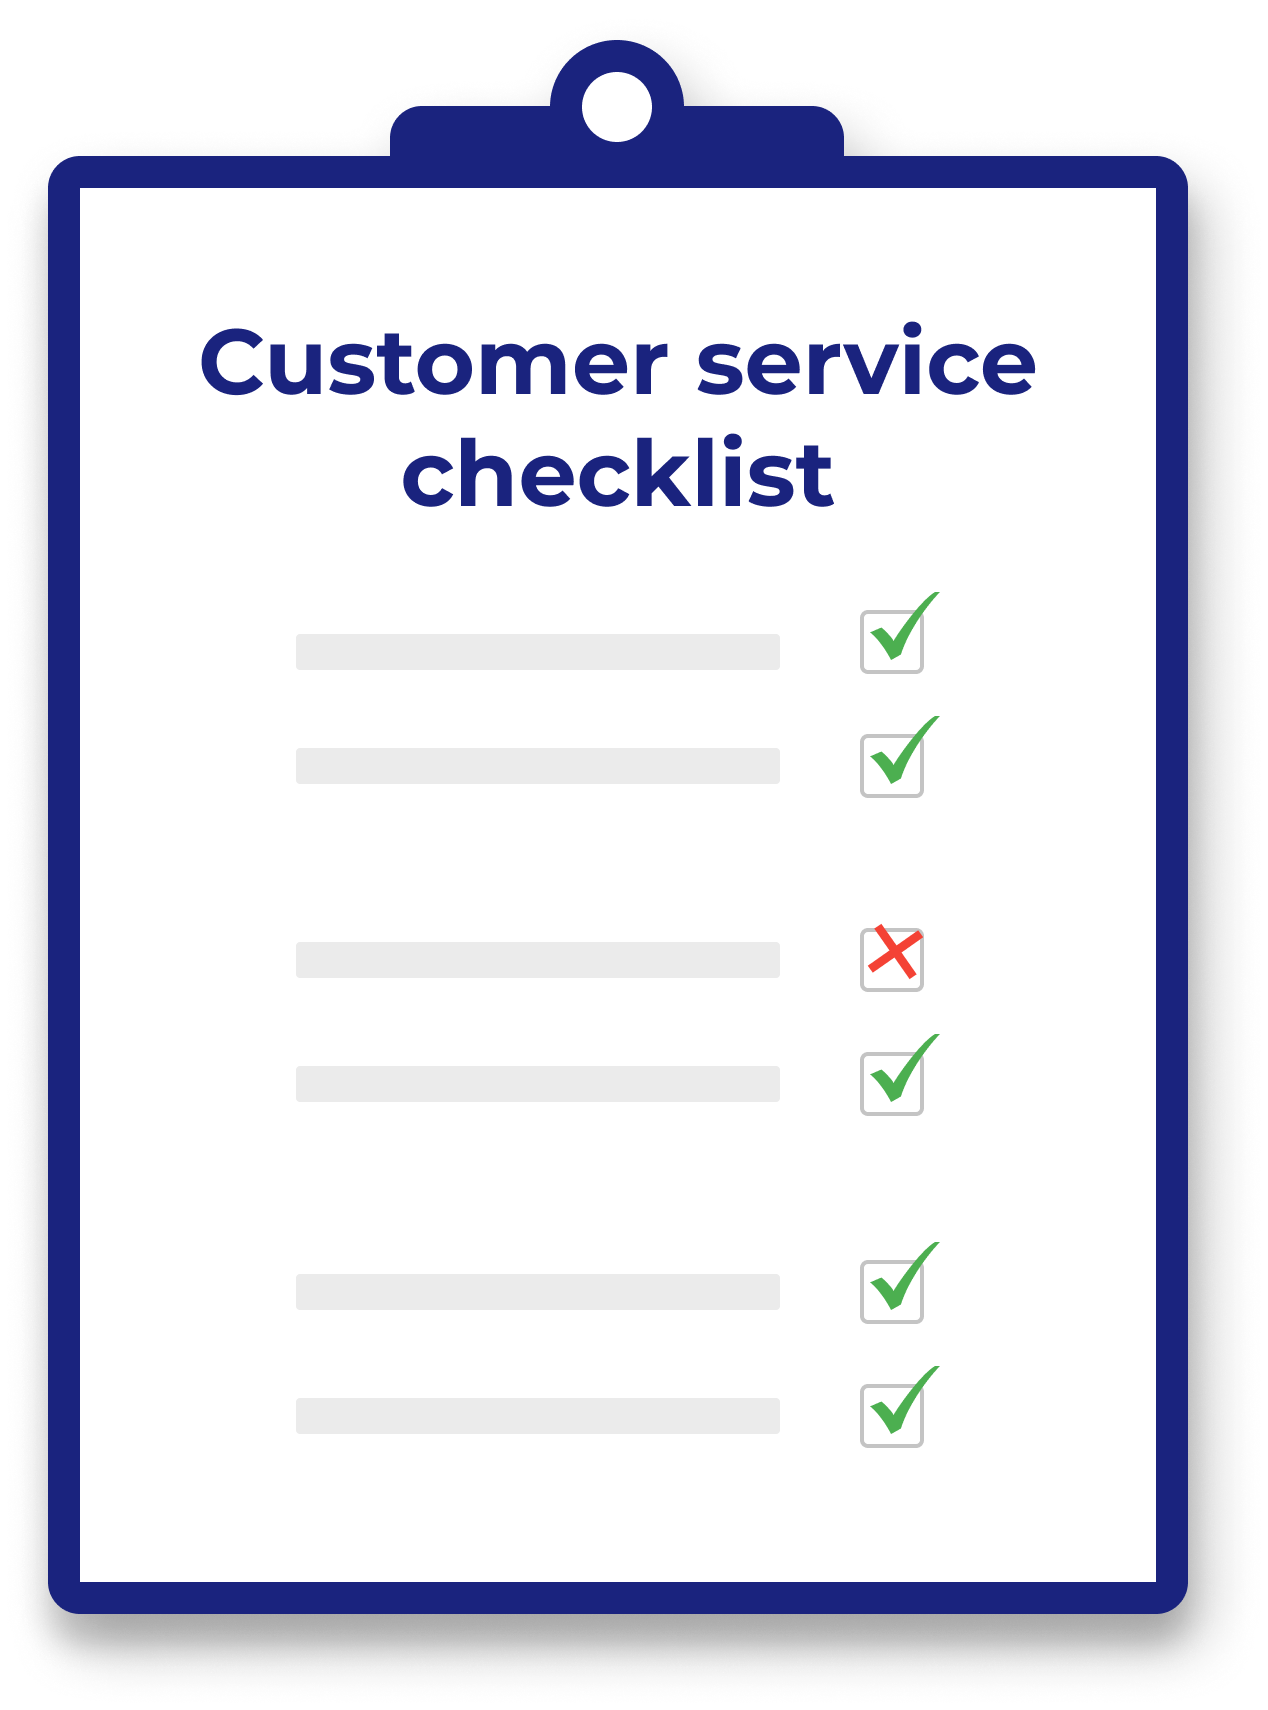 customer service checklist - How to Find and Hire Talented Restaurant Staff